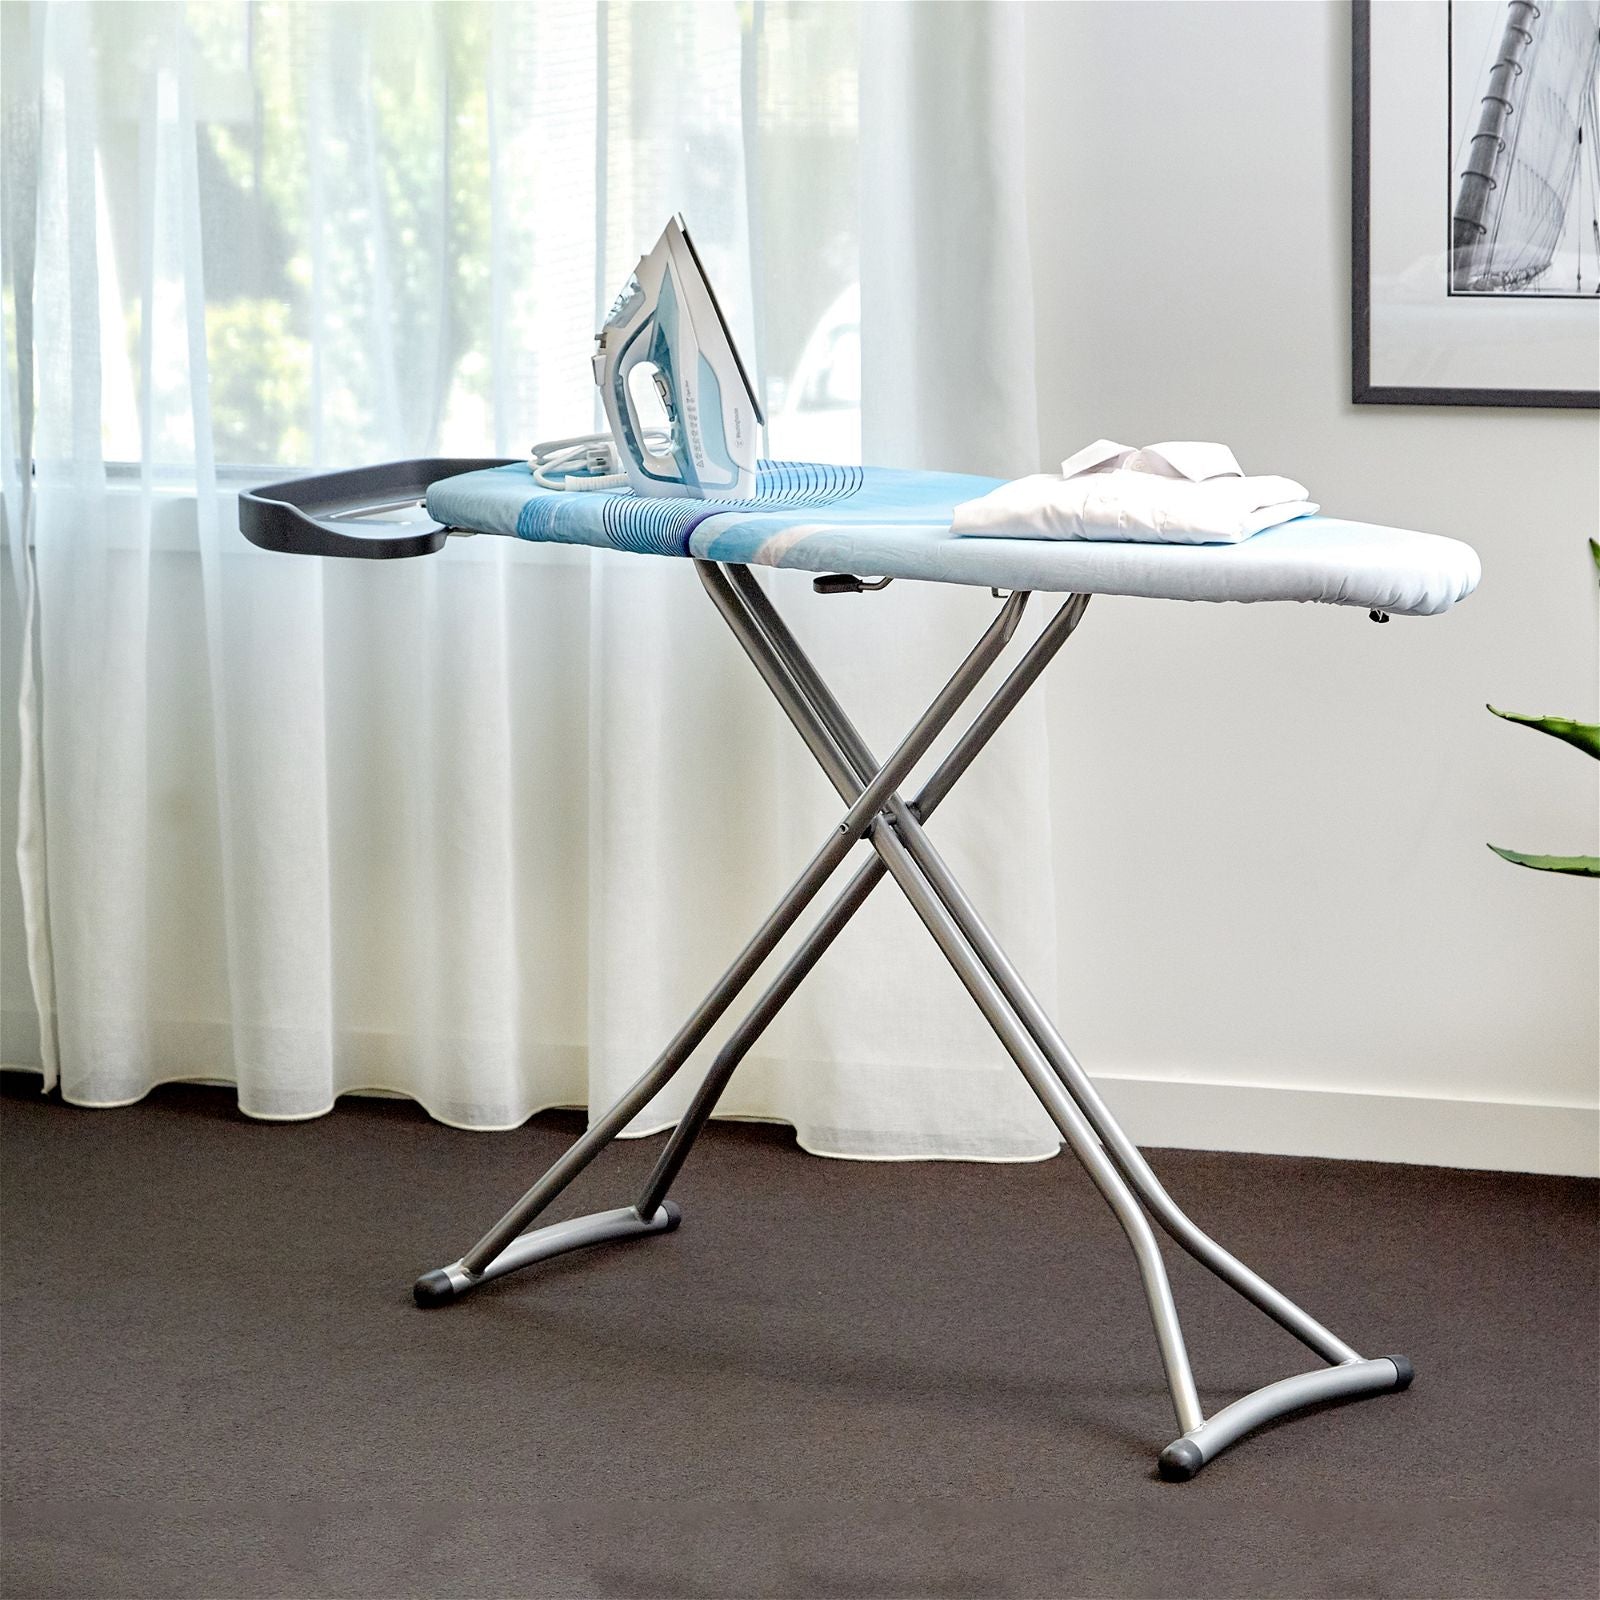 Westinghouse Ironing Board 1200mm Lightweight-#product_category#- Distributed by: RVM under license